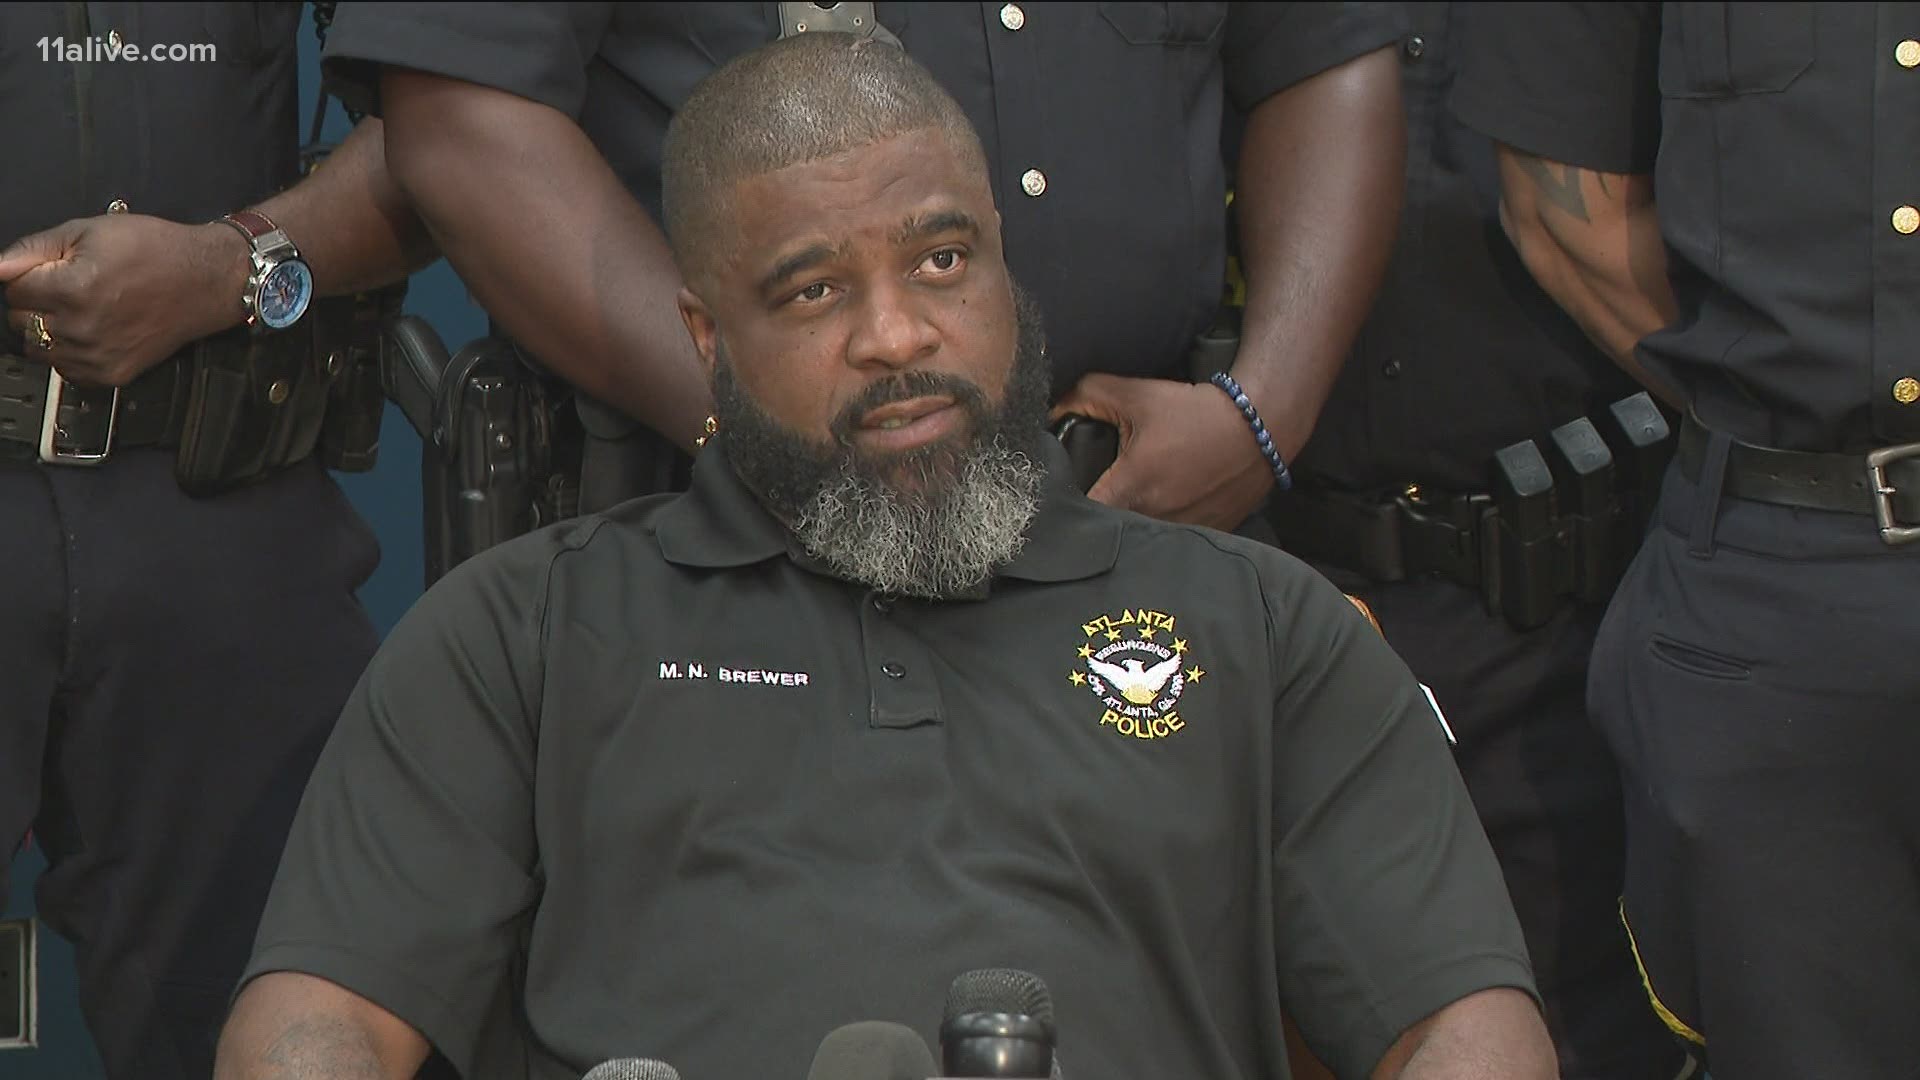 Atlanta police officer max brewer said the last 12 months of recovery have taken a toll on him physically and mentally.